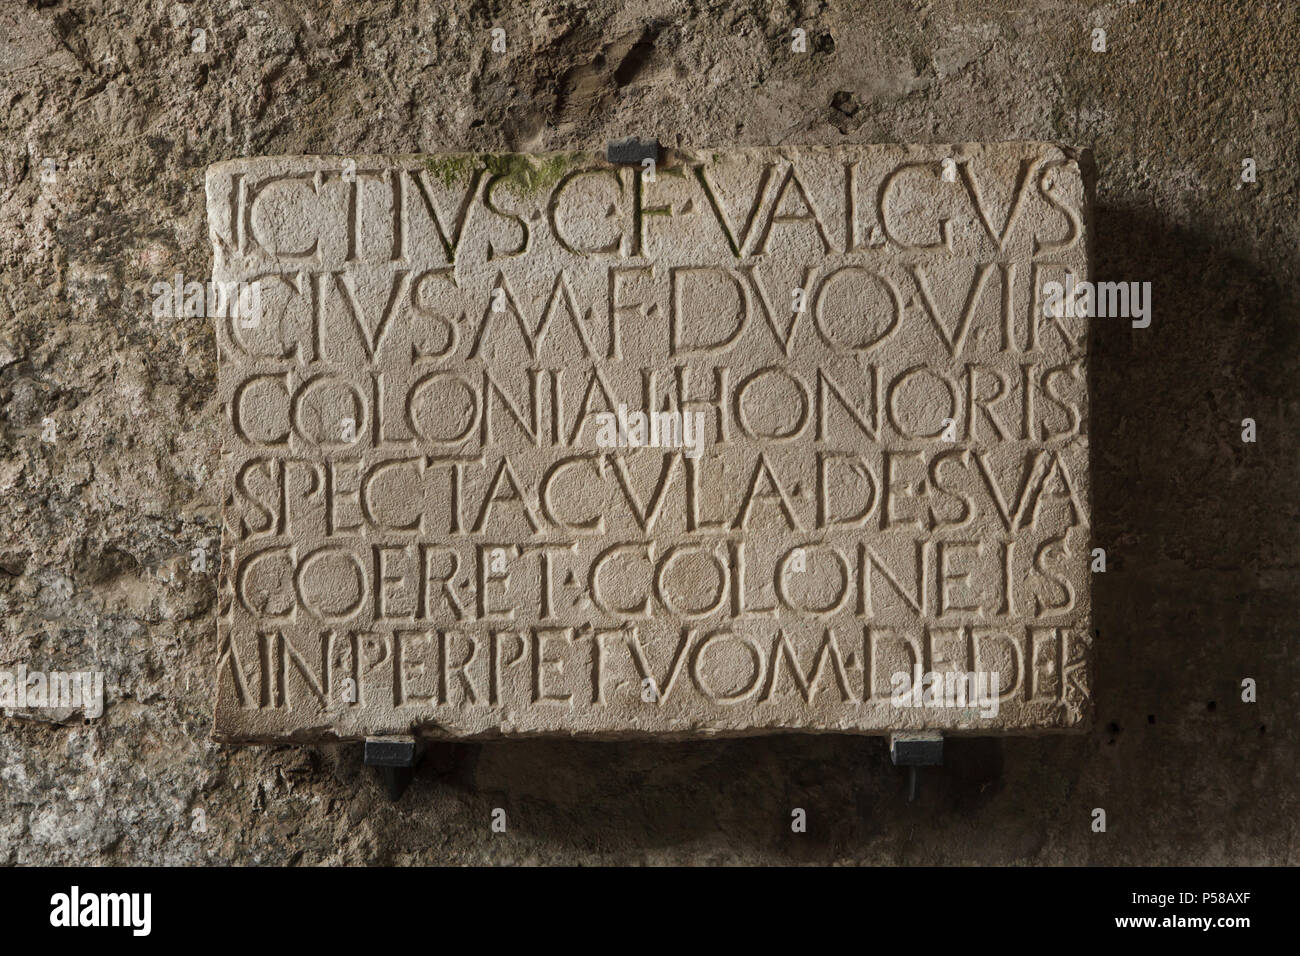 Marble plaque with Latin dedication placed at the South entrance to the Roman amphitheatre in the archaeological site of Pompeii (Pompei) near Naples, Campania, Italy. The plaque records that Quinctius Valgus and Marcus Porcius, who were duumvirs or magistrates of Pompeii, had erected the amphitheatre at their own expense. Stock Photo